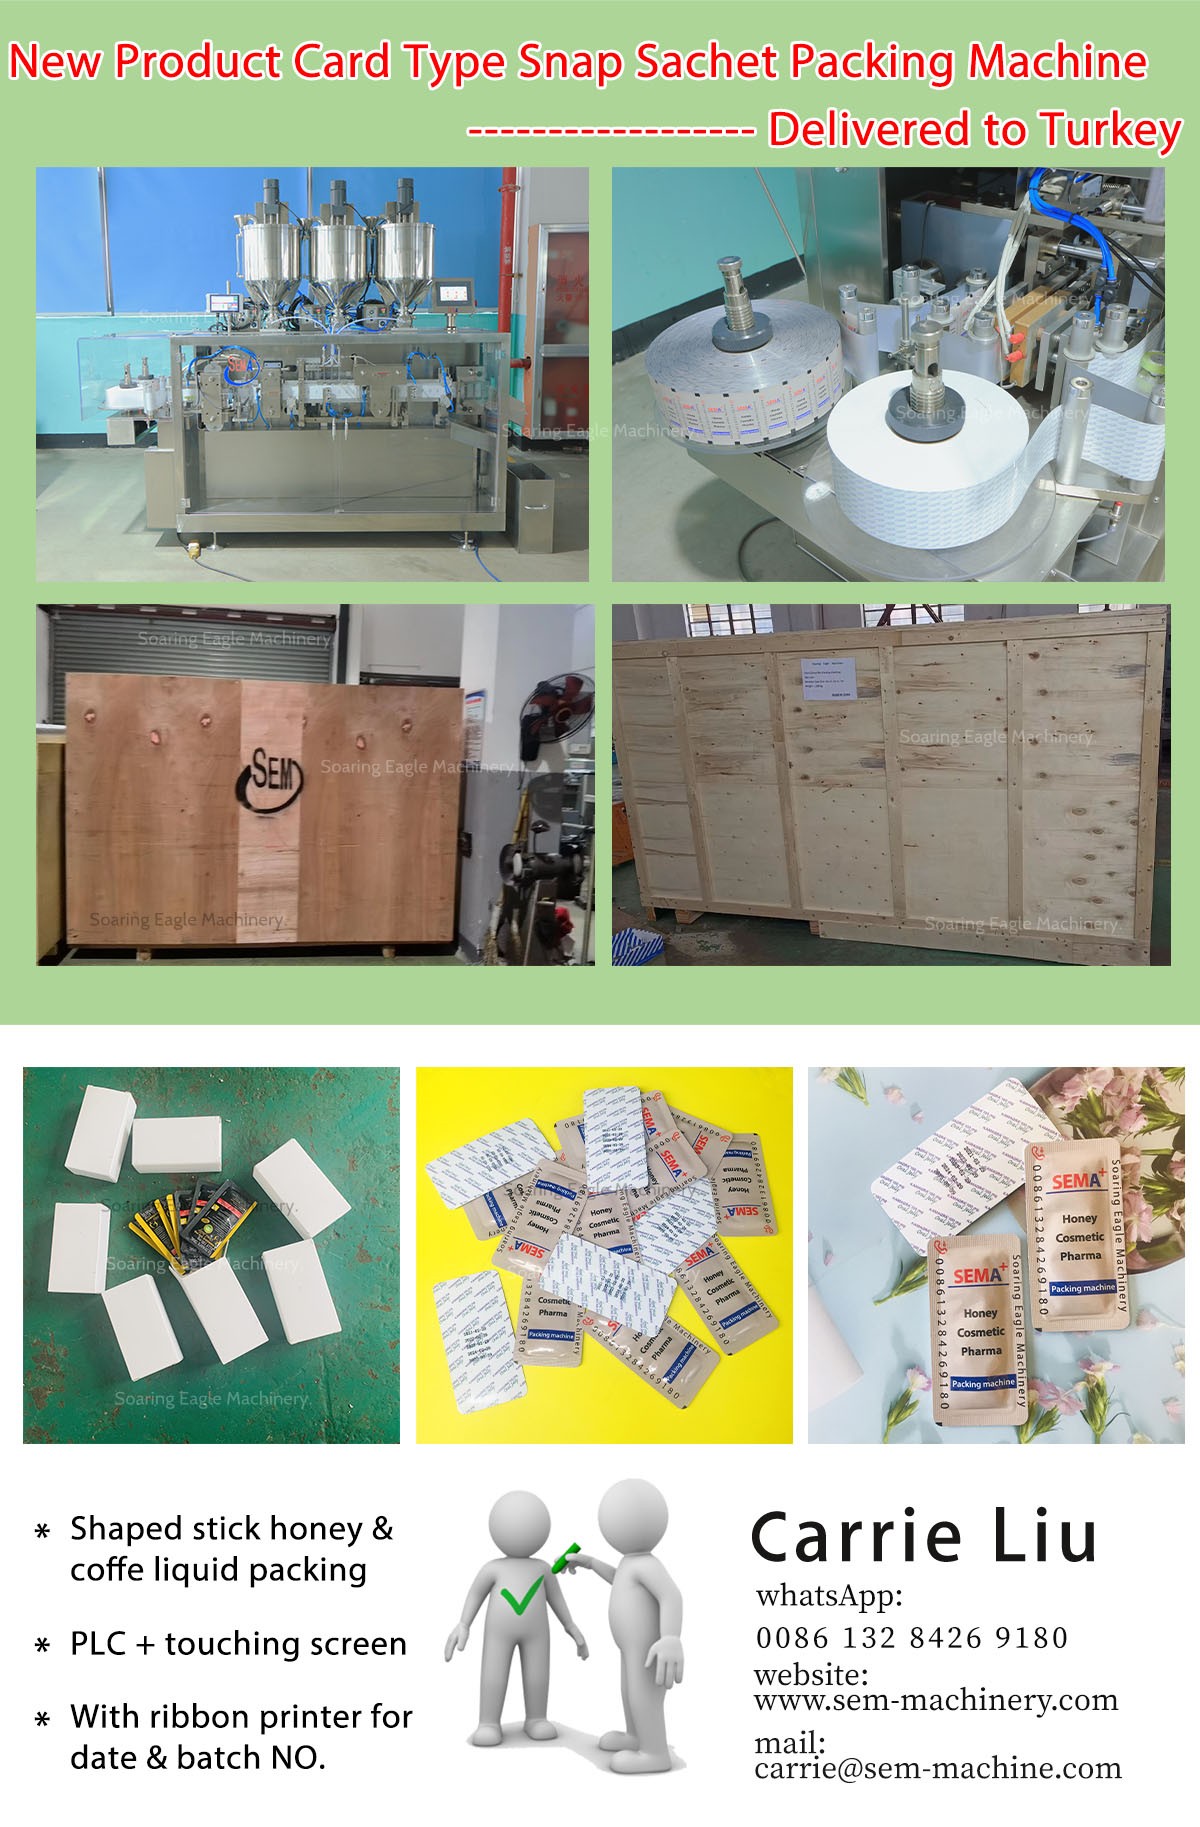 New product Card Type Snap Sachet packing machine——deliver to Turkey